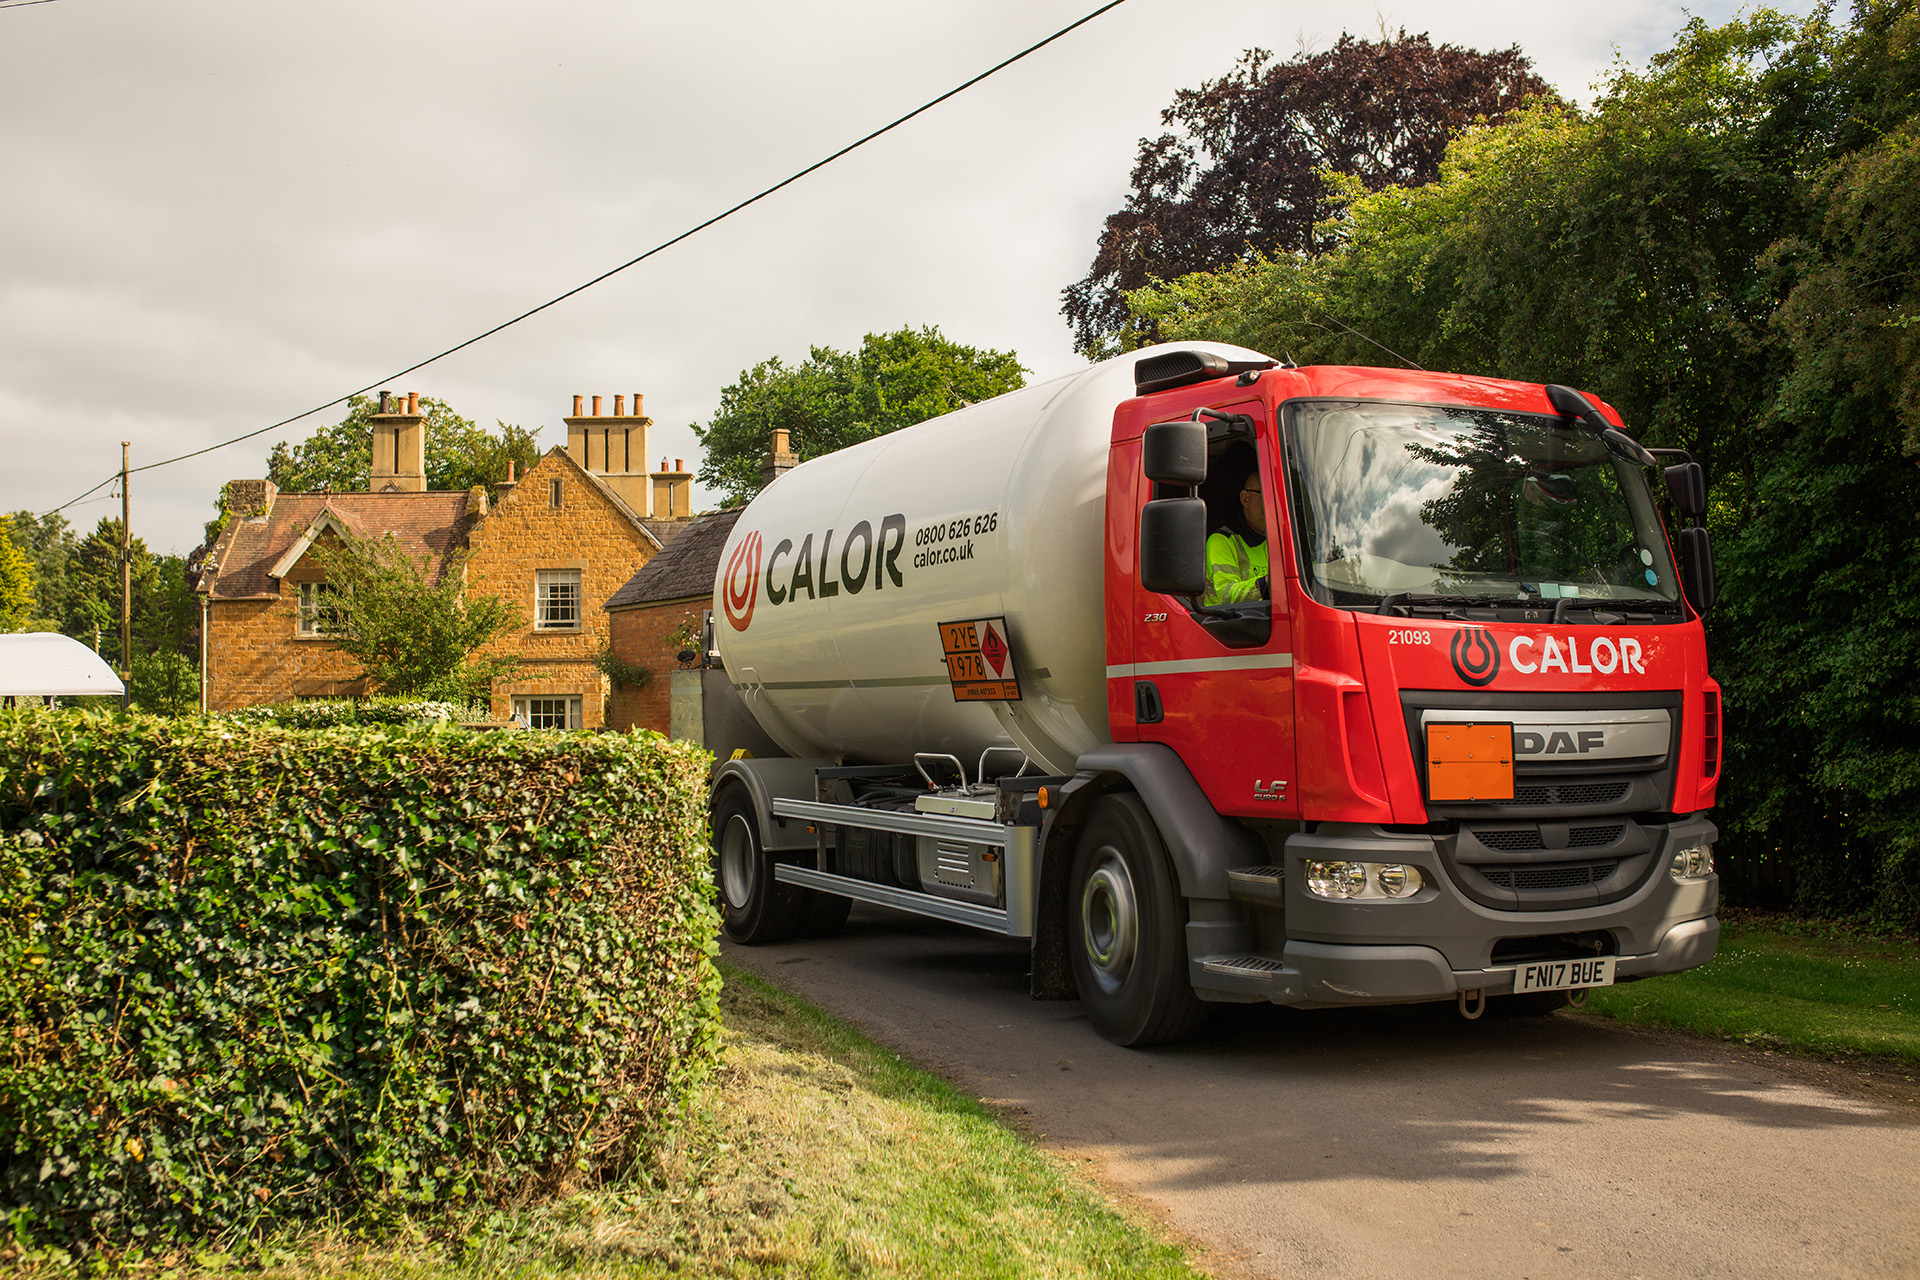 A Calor lorry driving on a narrow road in a rural village